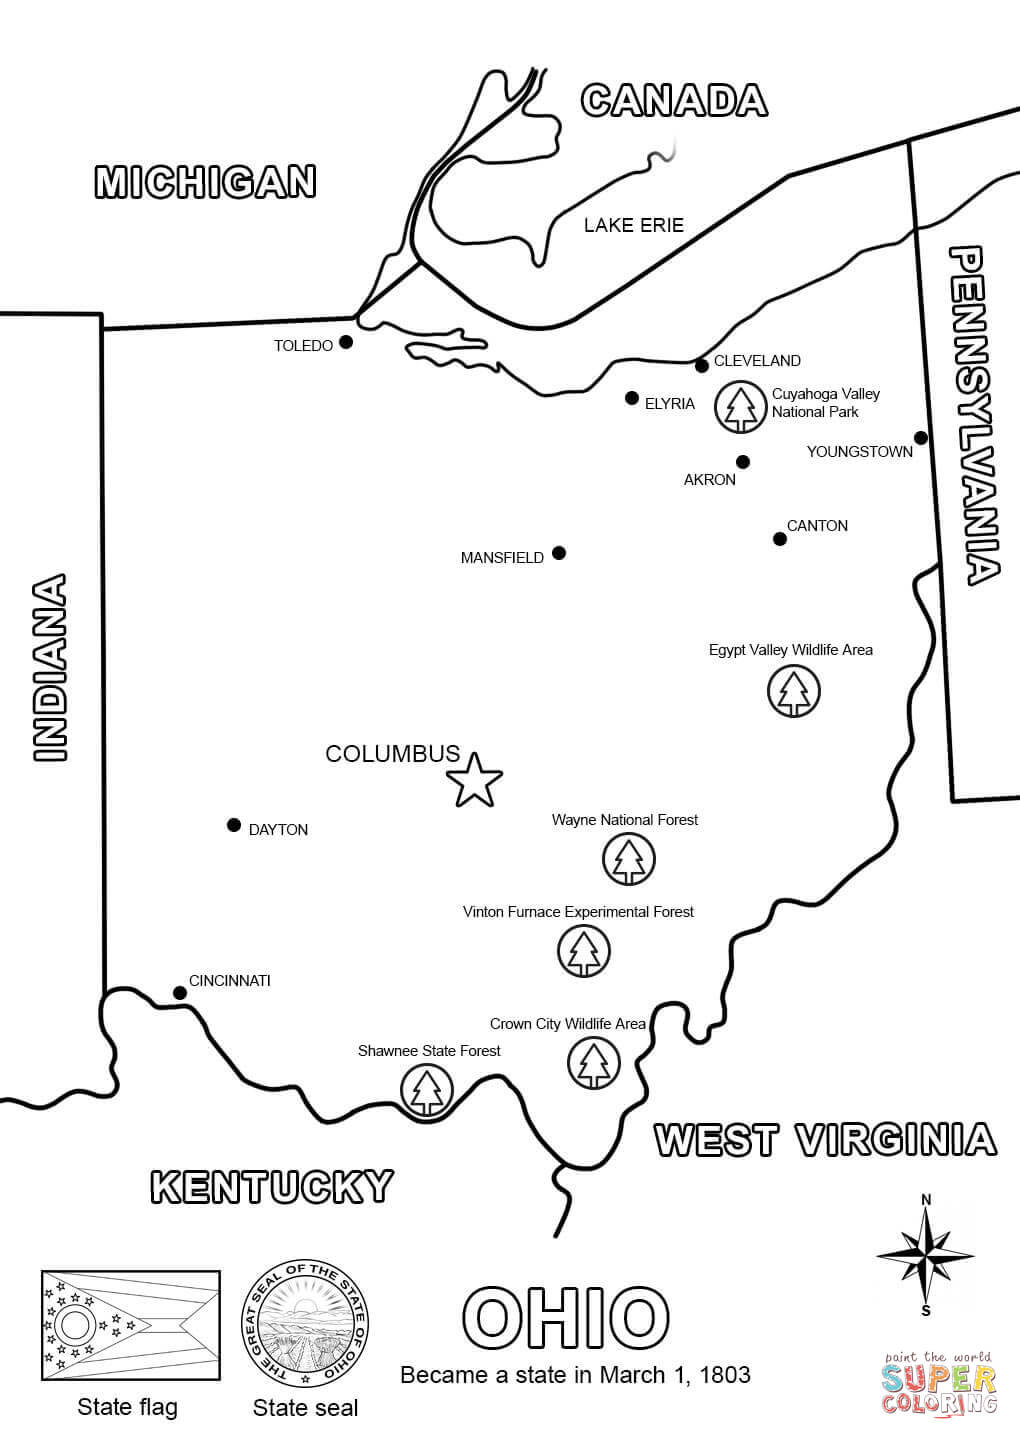 Ohio Map coloring page | Free Printable Coloring Pages